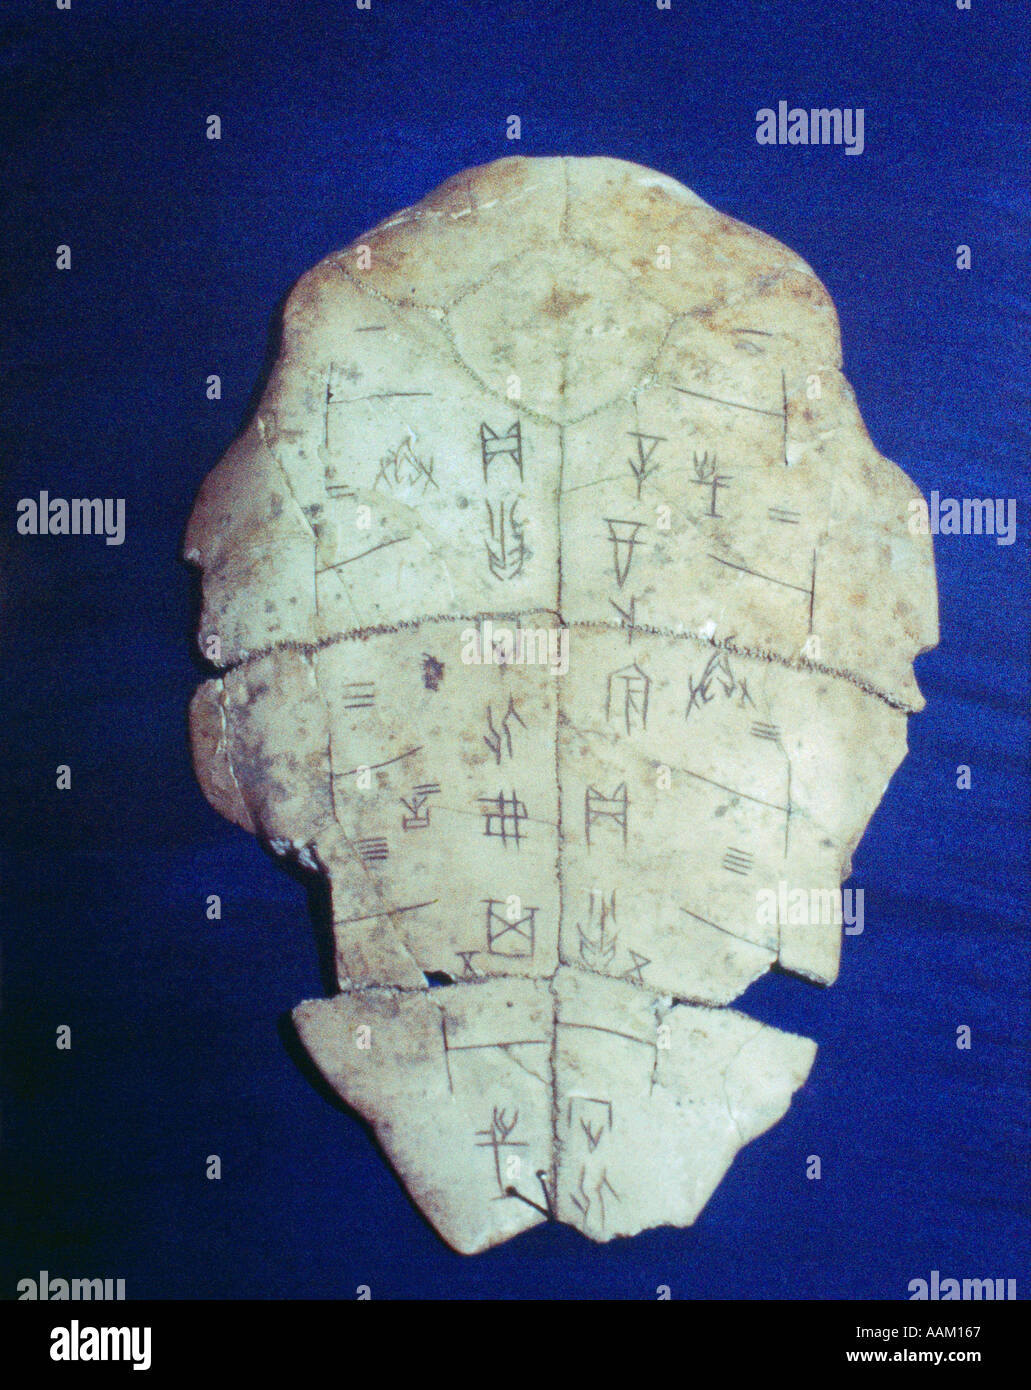 Taipei Taiwan Inscribed Turtle Plastron National Museum Ancient Chinese Writing Symbols Stock Photo